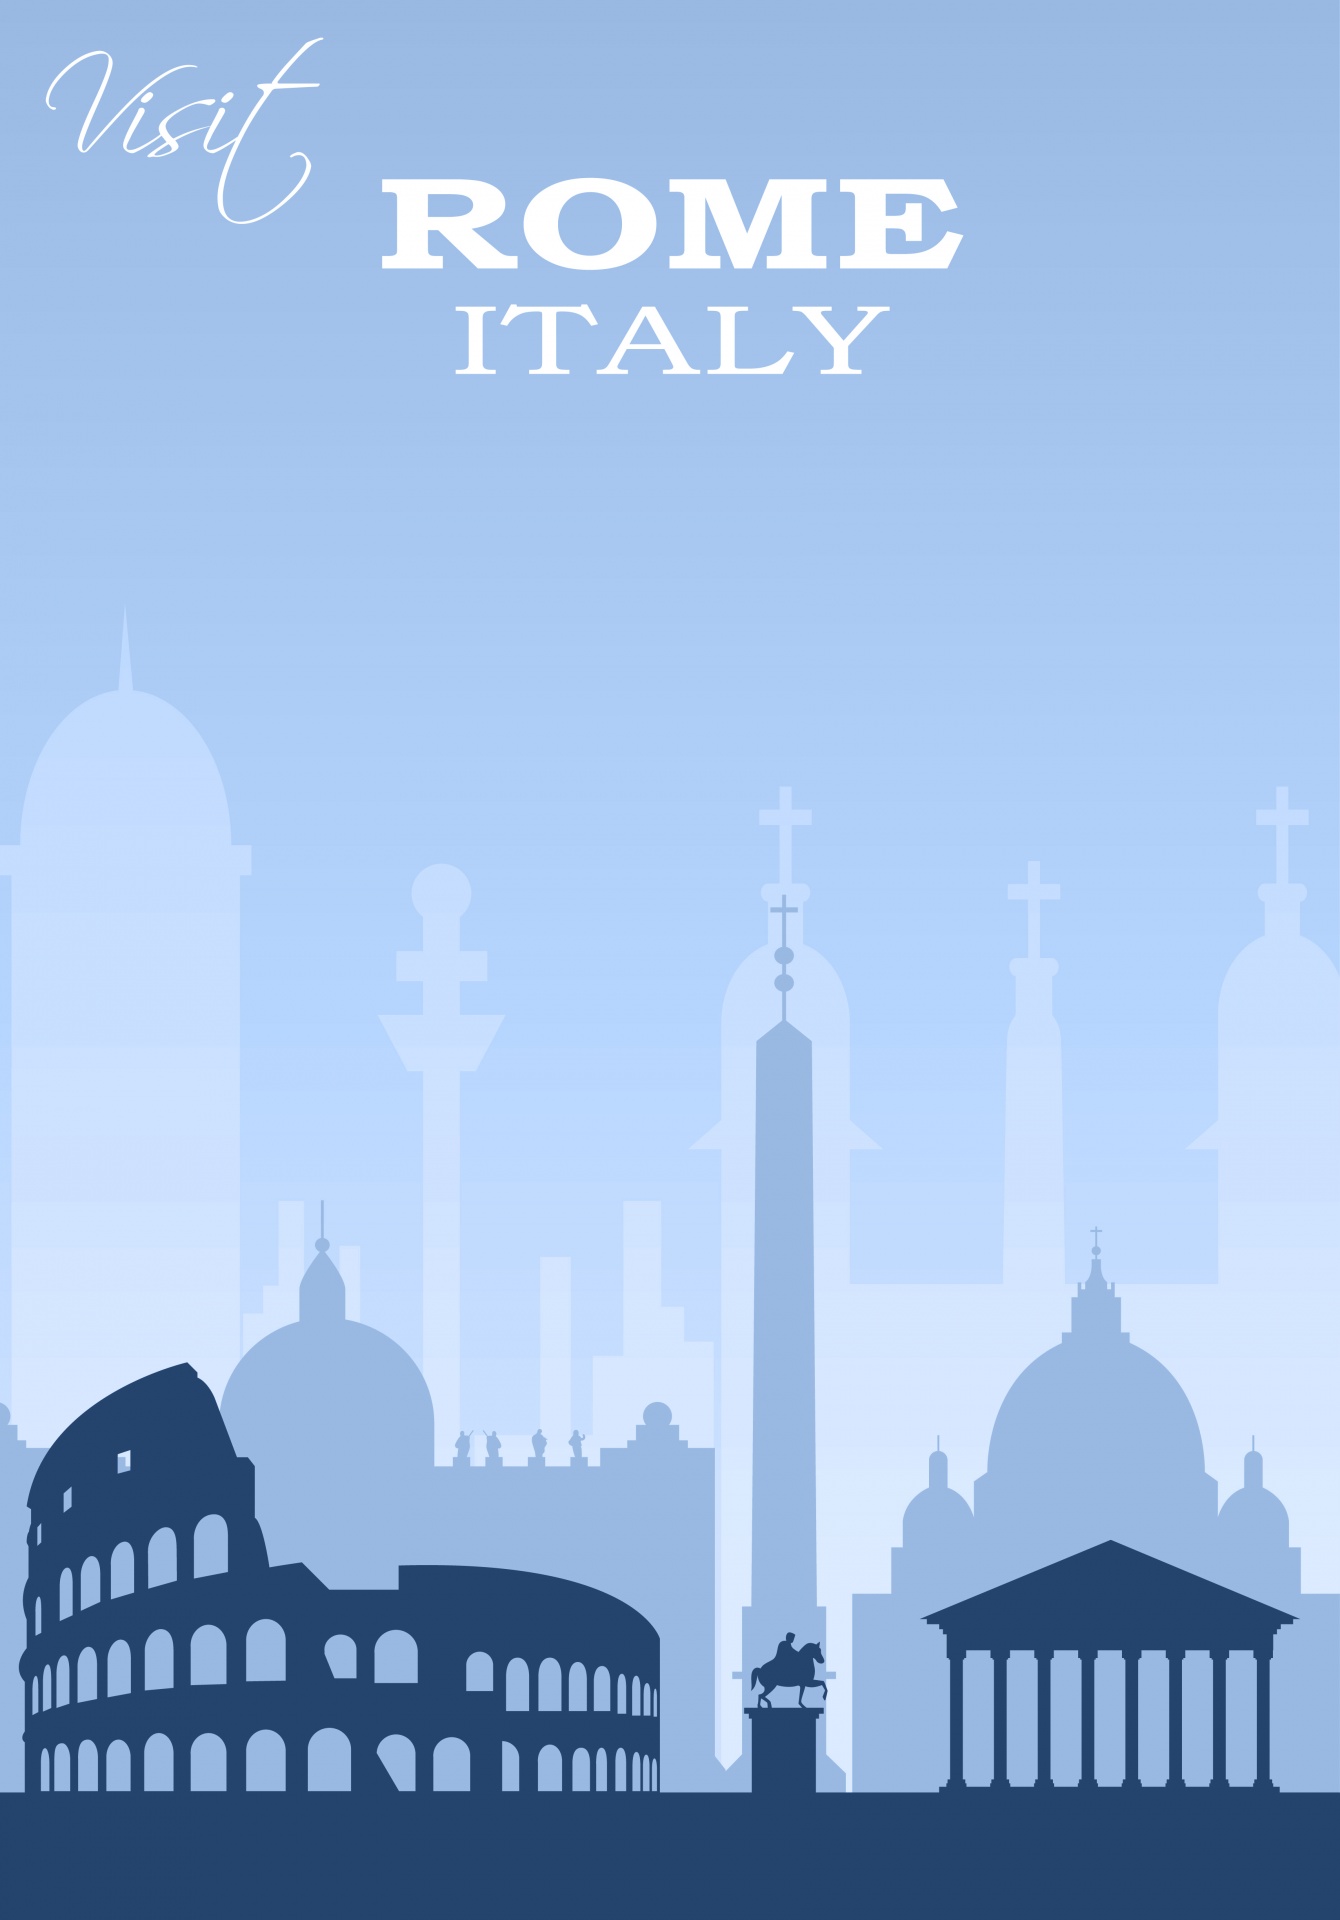 Rome, Italy Travel Poster